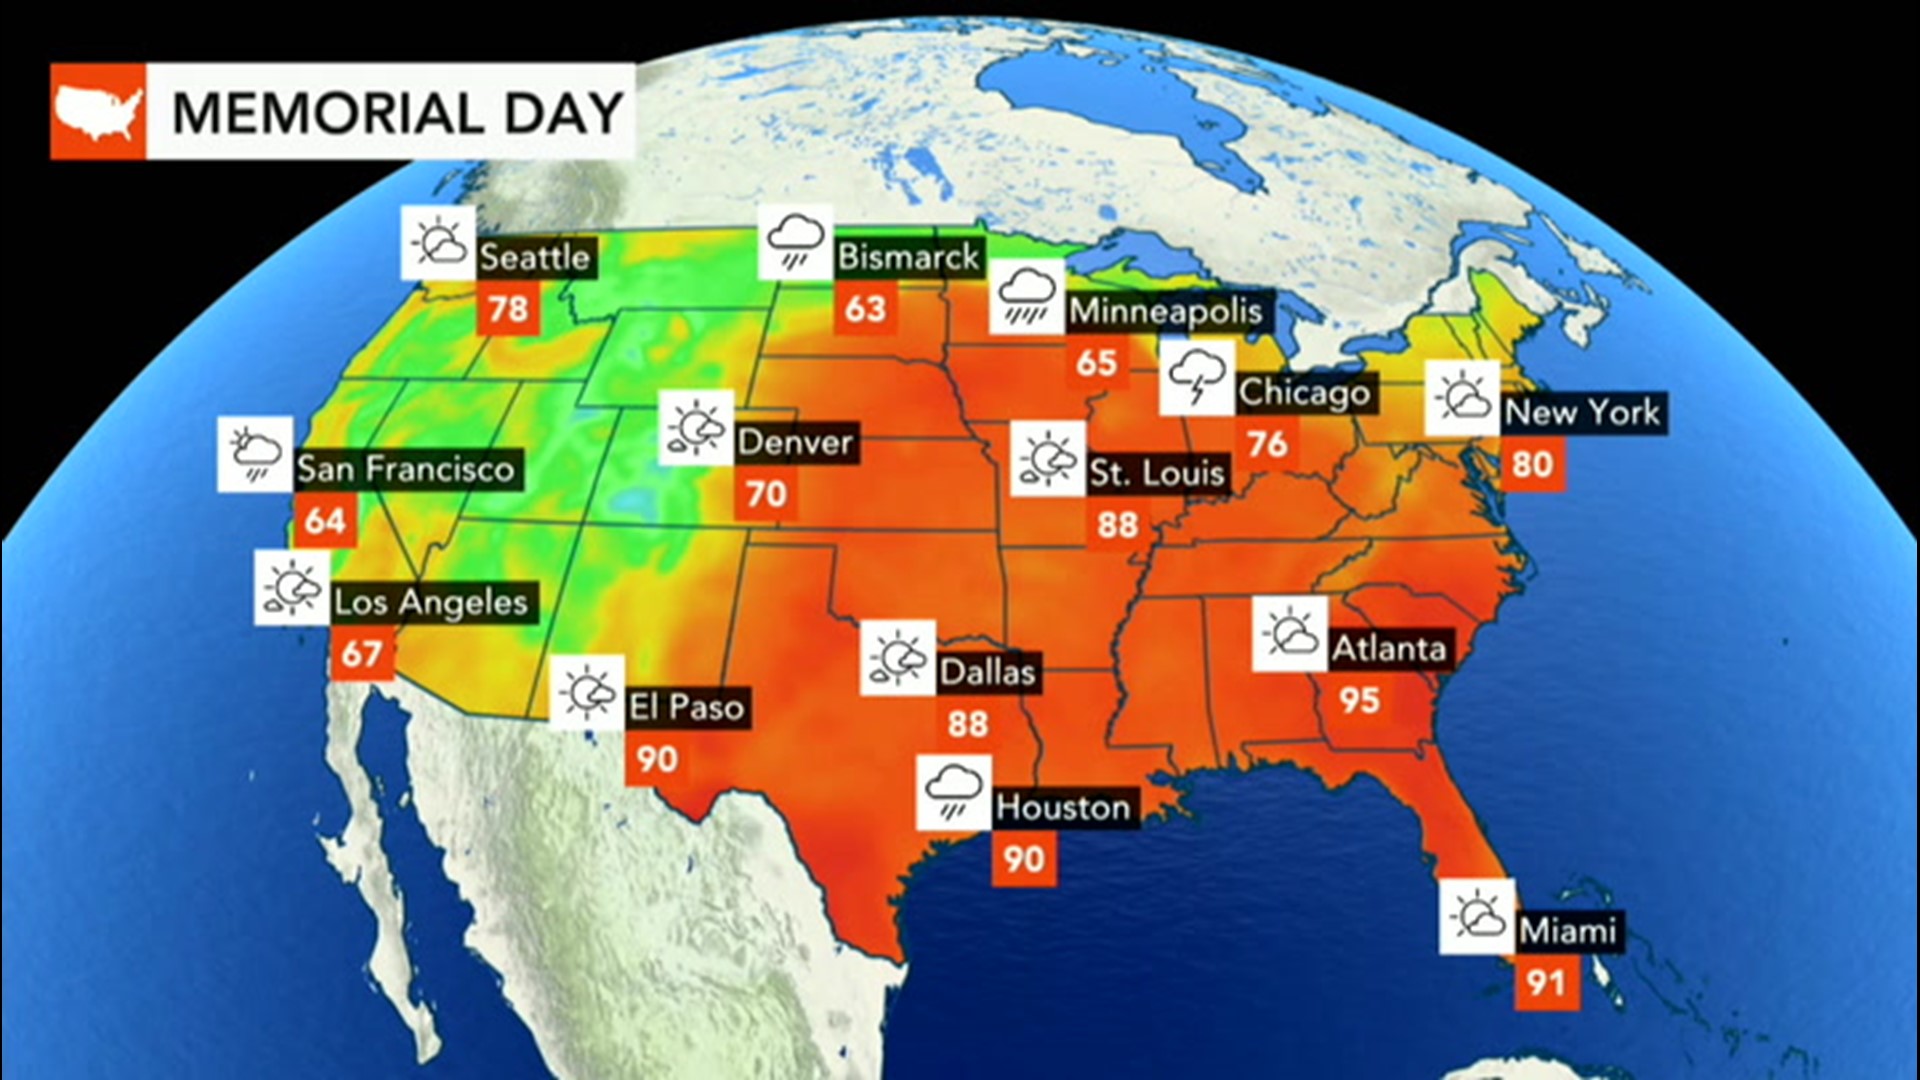 Severe storms could pose travel impacts to millions of Americans in the central U.S. ahead of the holiday.